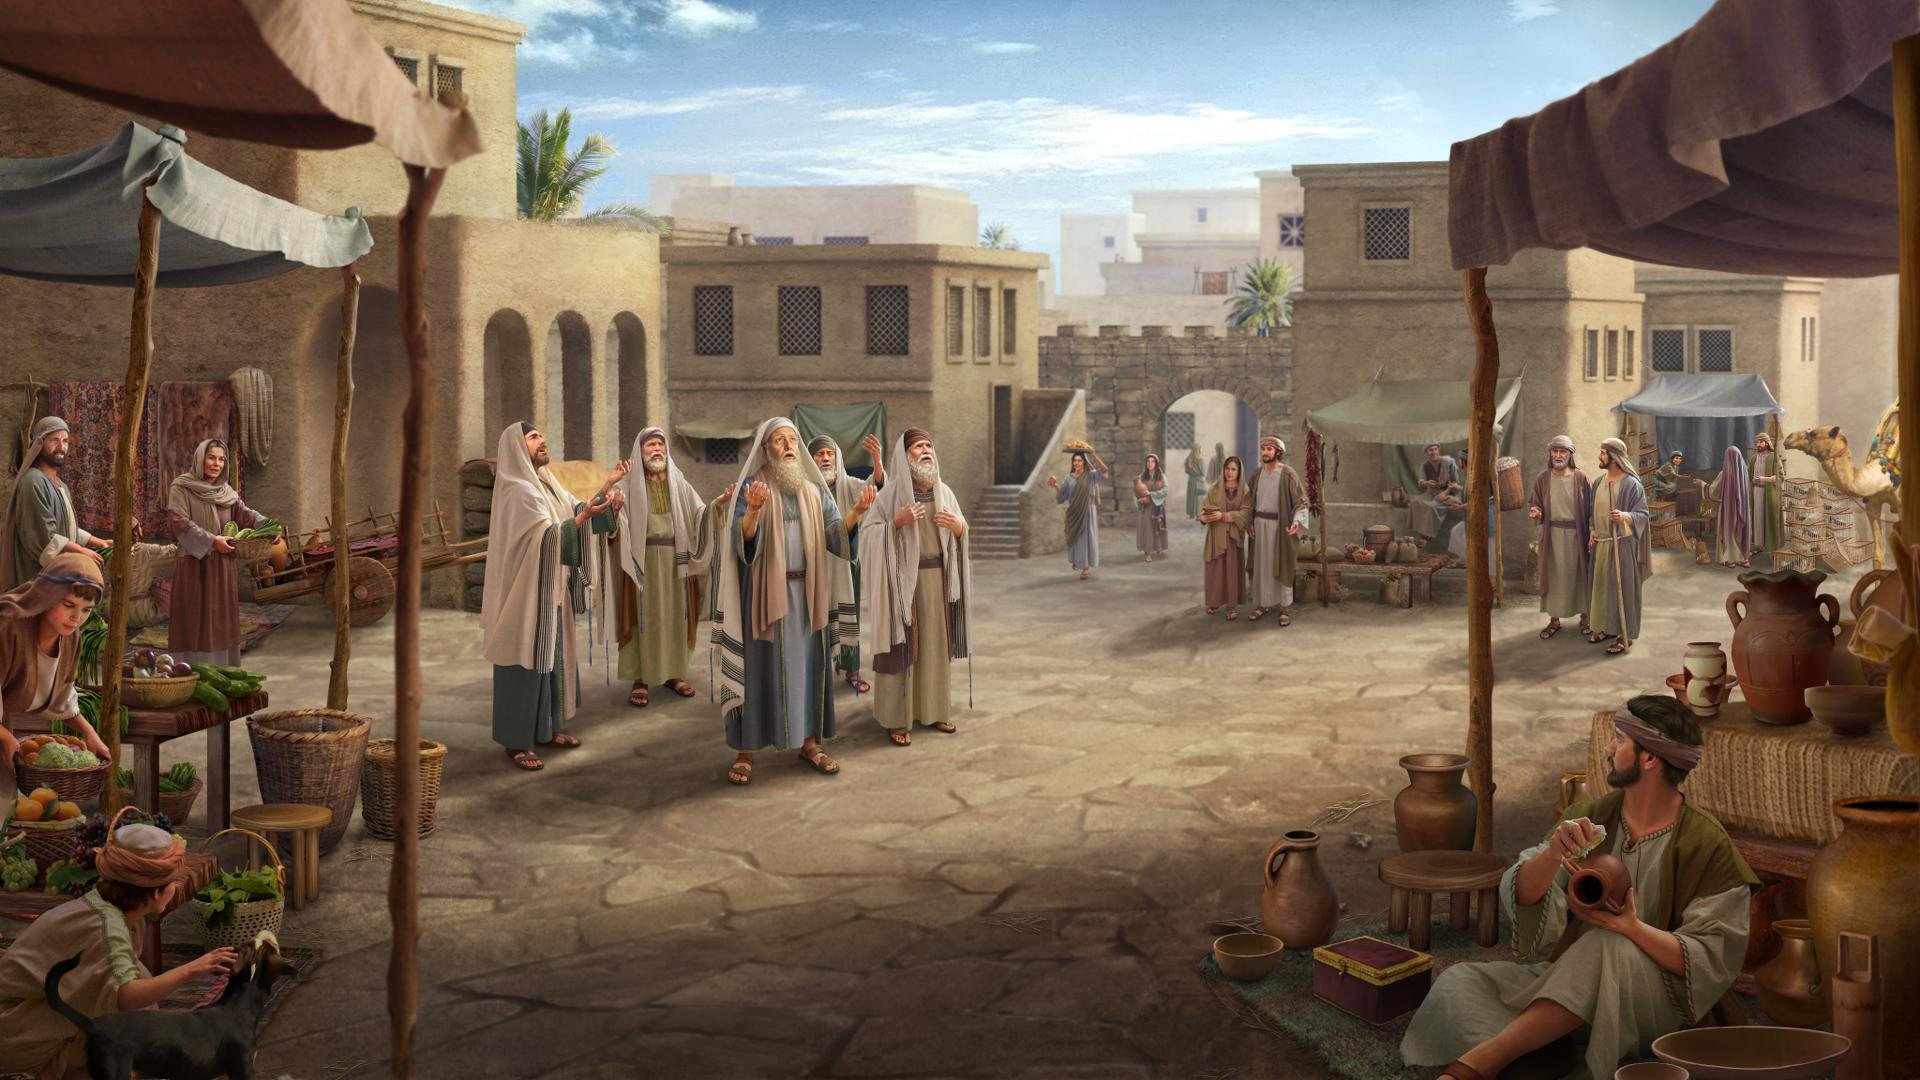 The Pharisees Purposely Praying At A Crossroads